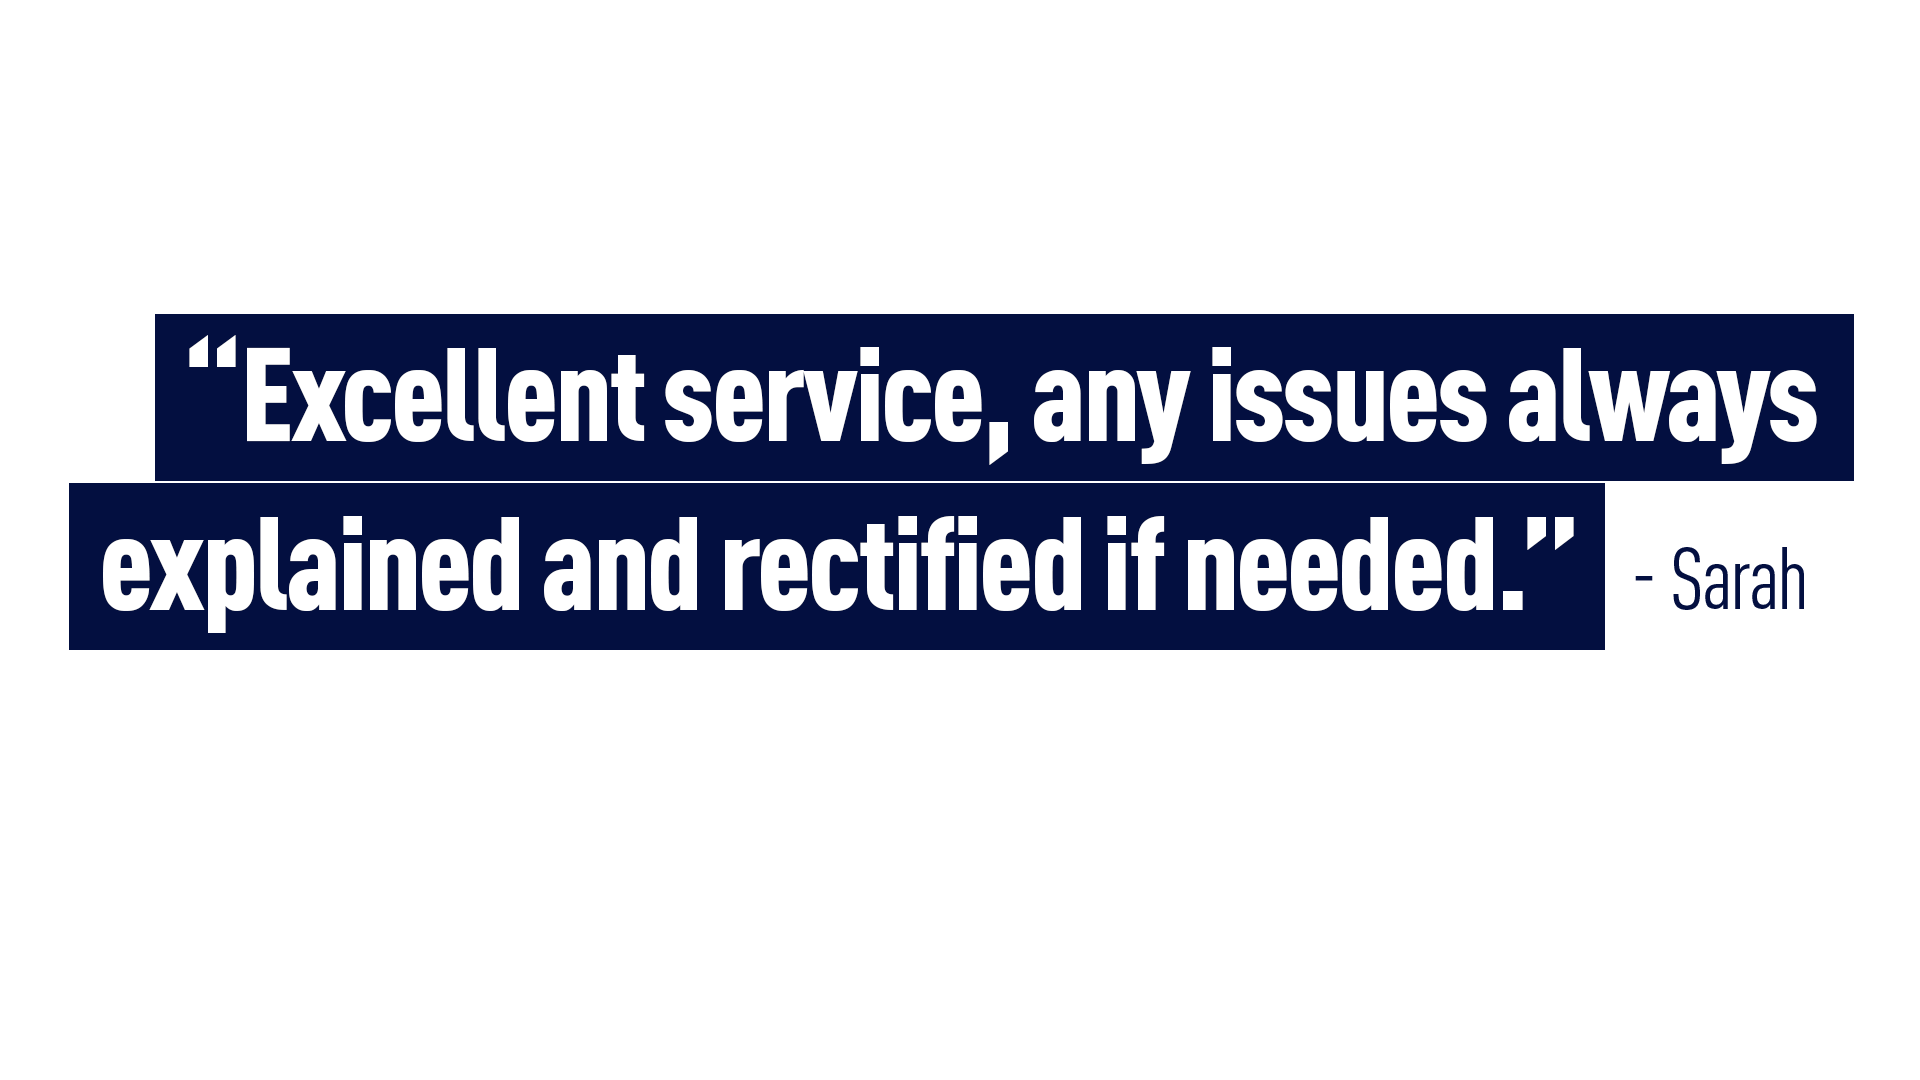 “Excellent service, any issues always explained and rectified if needed.” Sarah 